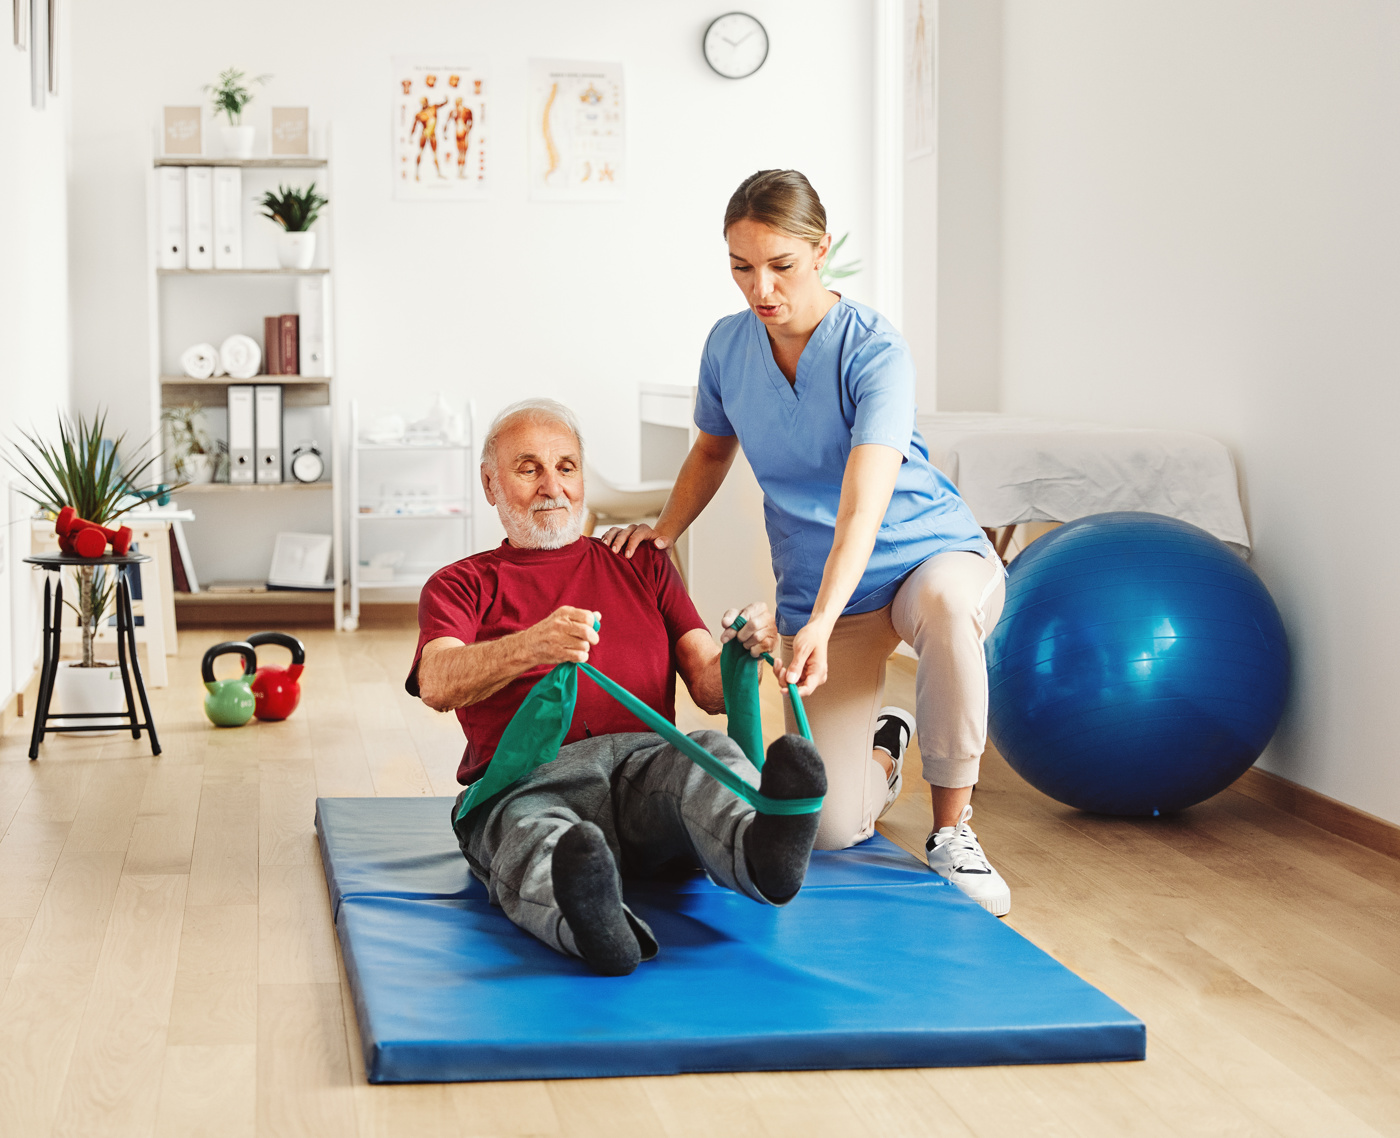 A physiotherapist FH shows an elderly patient the correct way to perform an exercise with the Theraband.